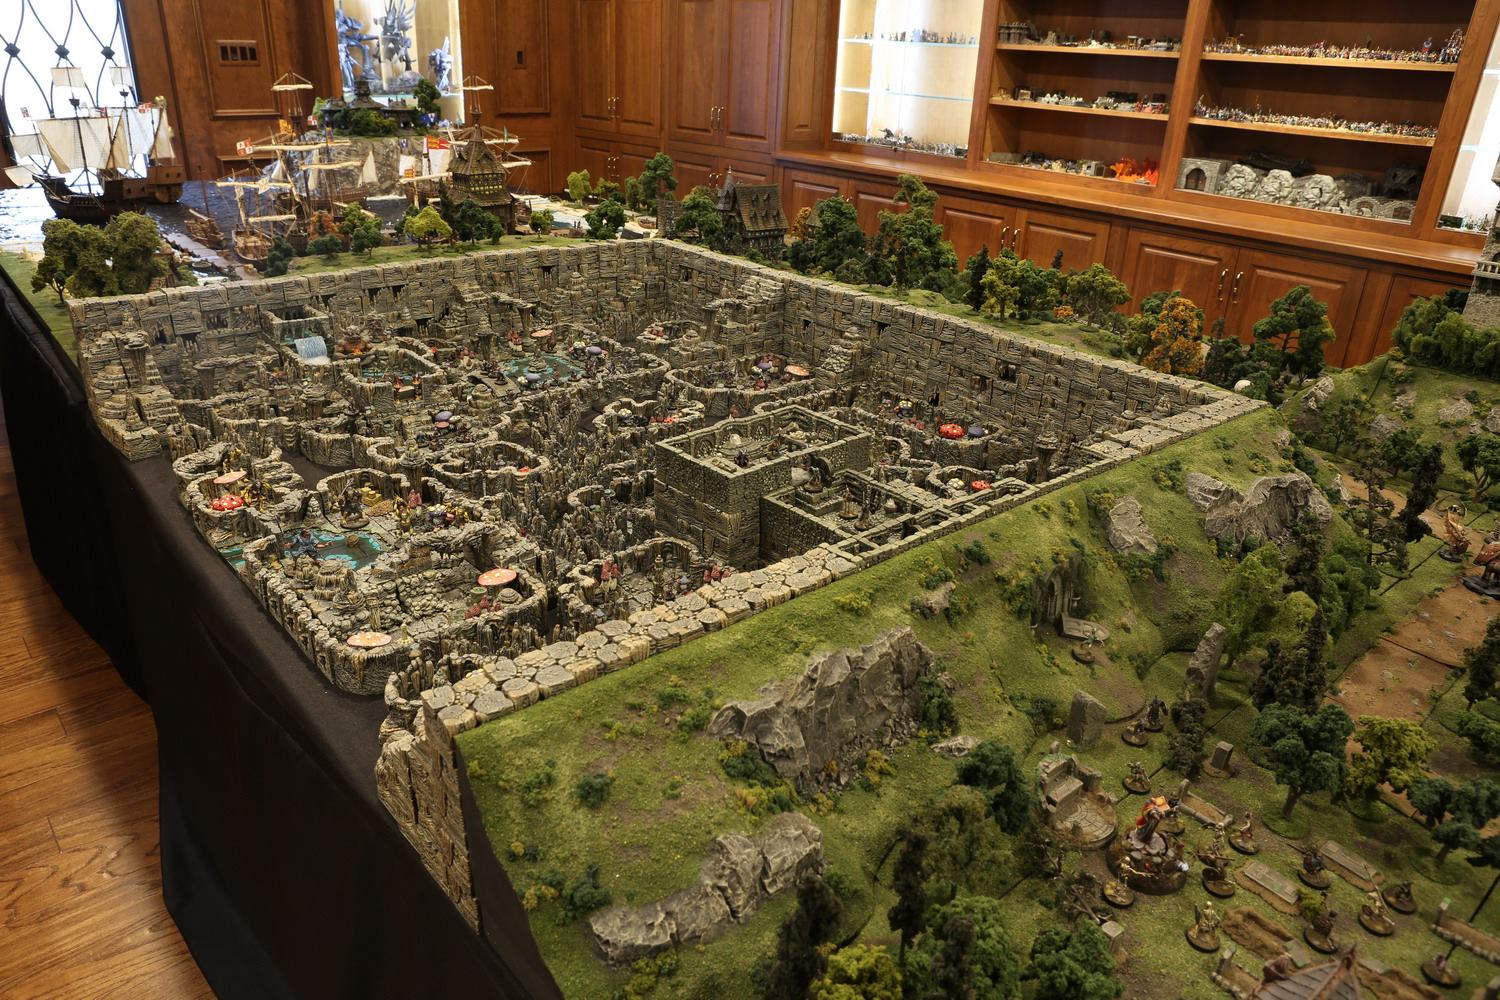 Look At This Amazing D&D Diorama